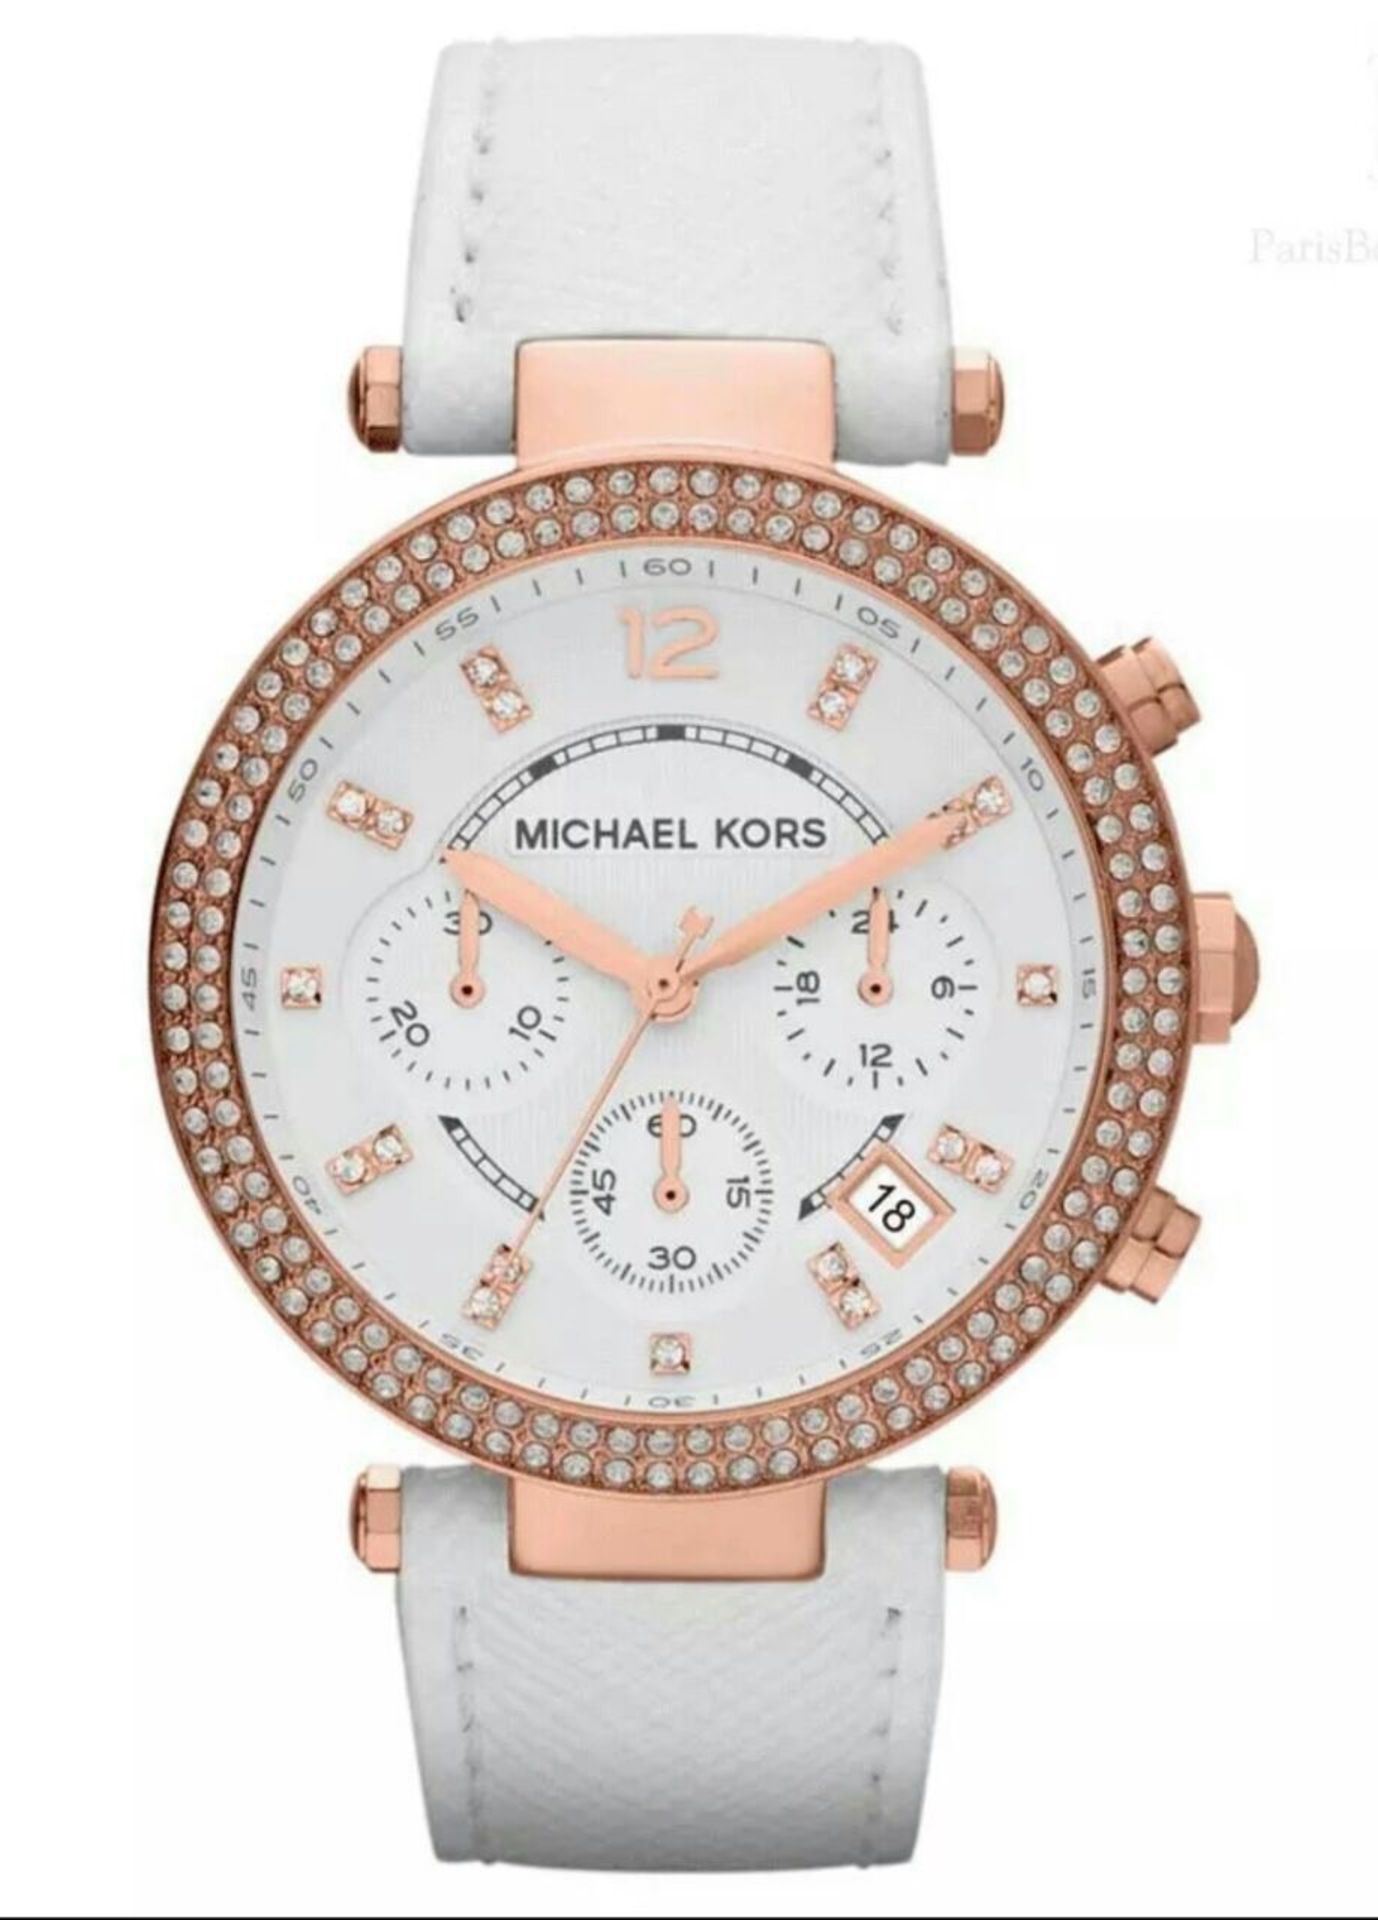 BRAND NEW LADIES MICHAEL KORS MK2281, COMPLETE WITH ORIGINAL PACKAGING AND MANUAL